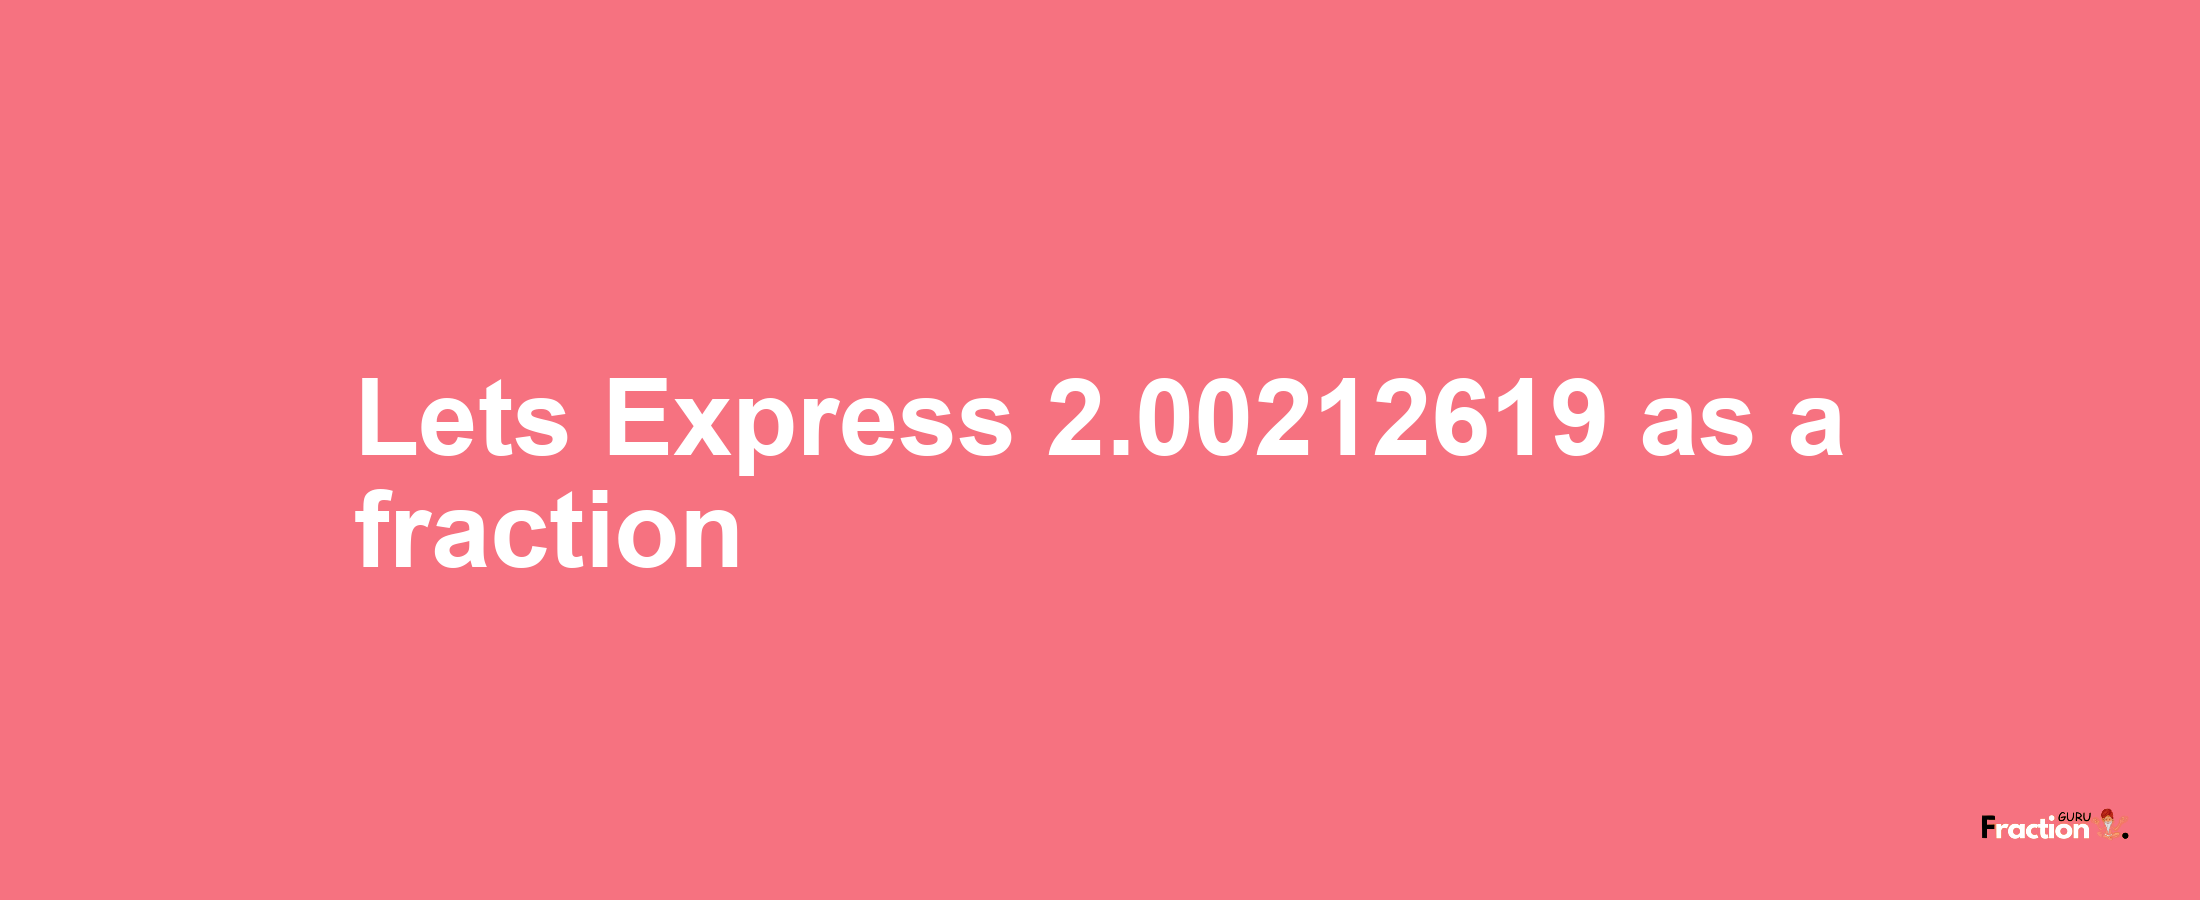 Lets Express 2.00212619 as afraction